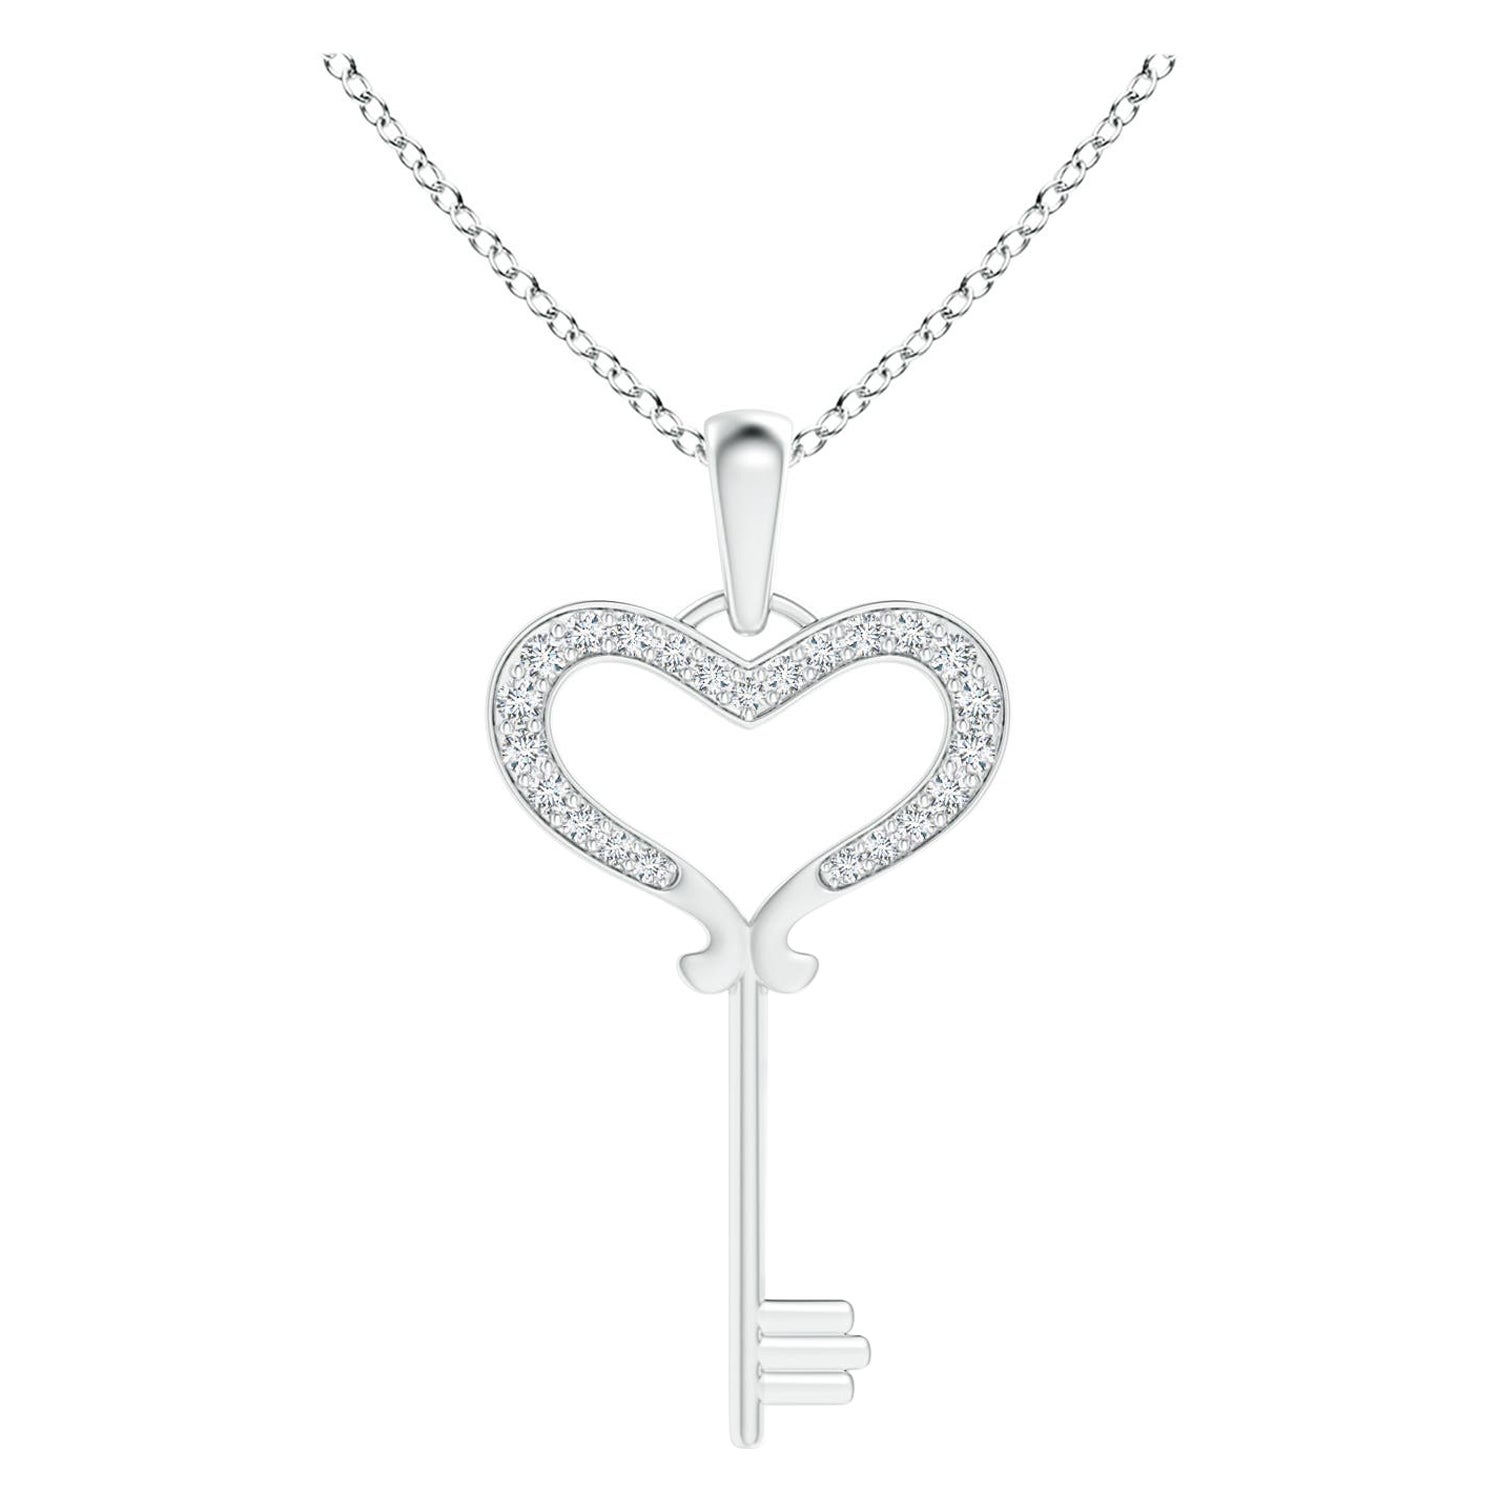 ANGARA Natural Pave-Set 0.13cttw Diamond Heart Key Pendant in 14K White Gold For Sale